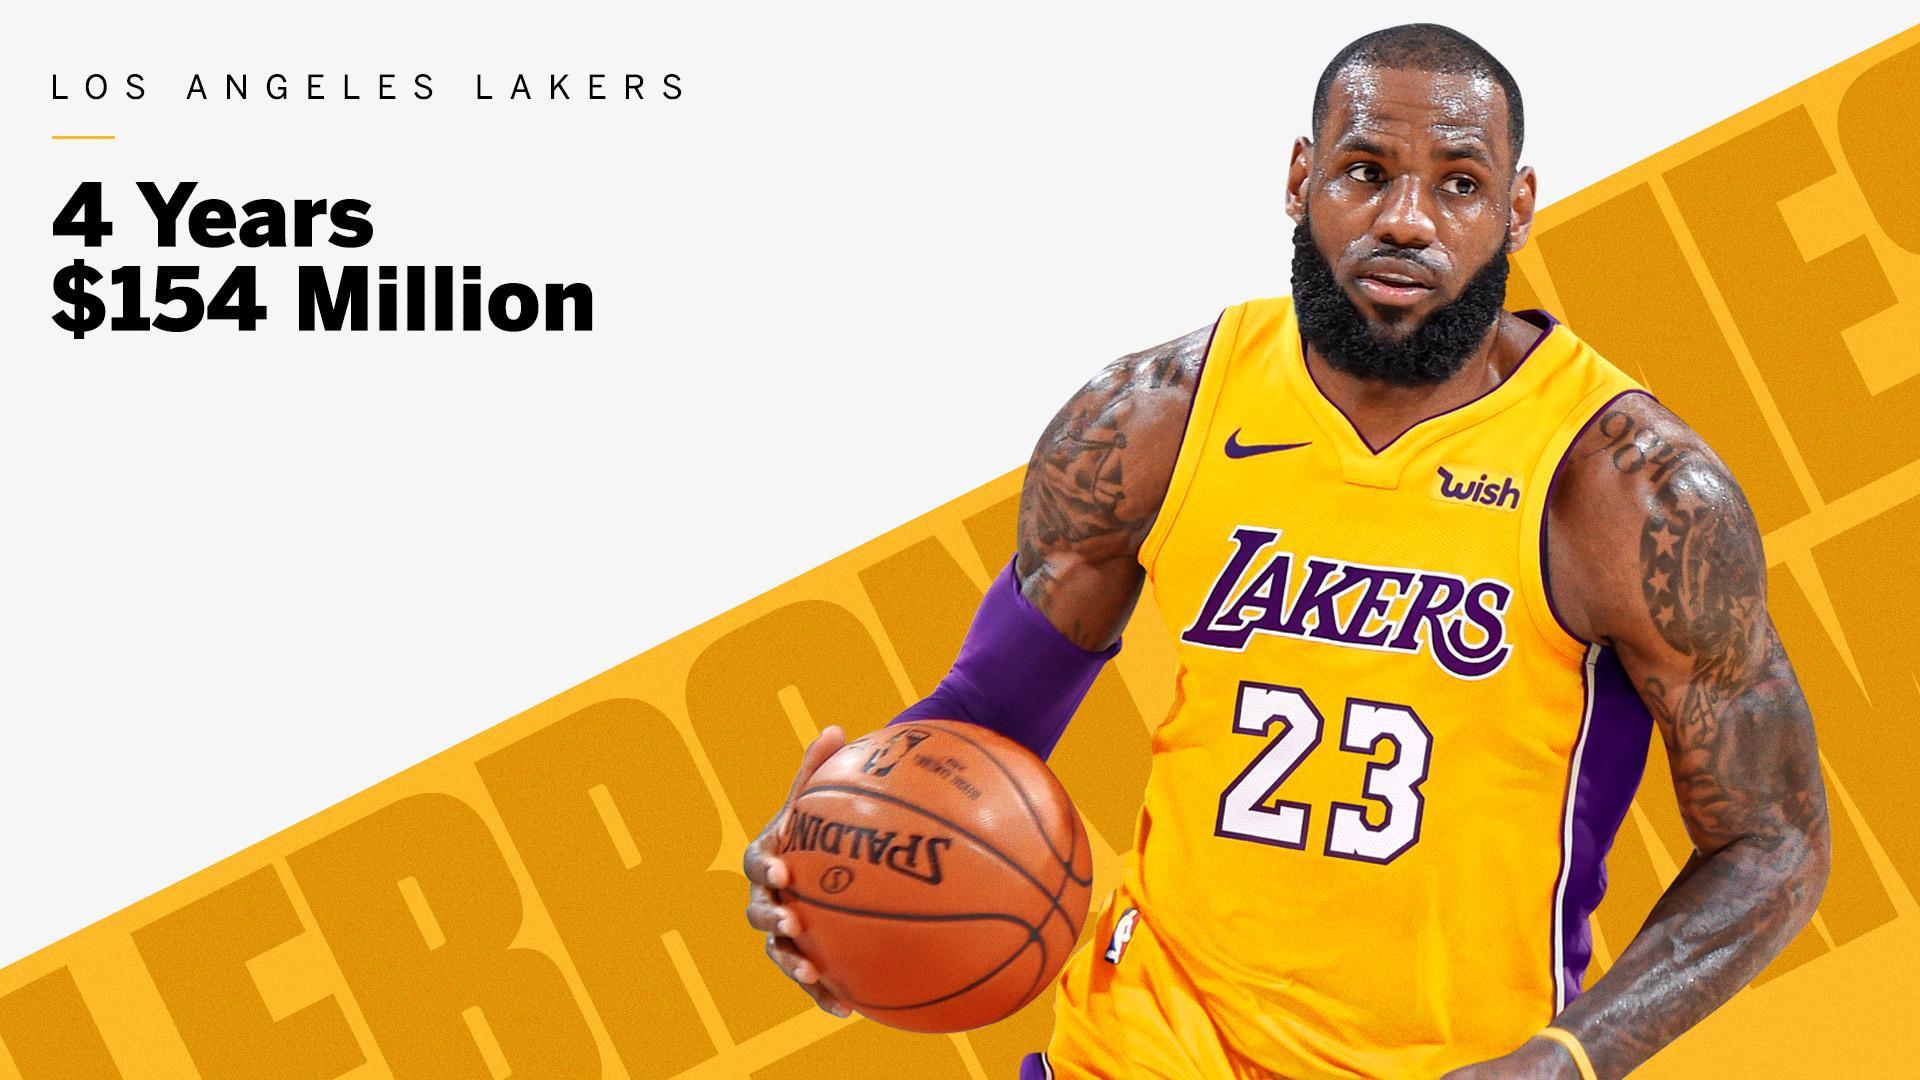 LeBron James Signs 4 Year, $154 Million Deal With The Los Angeles Lakers